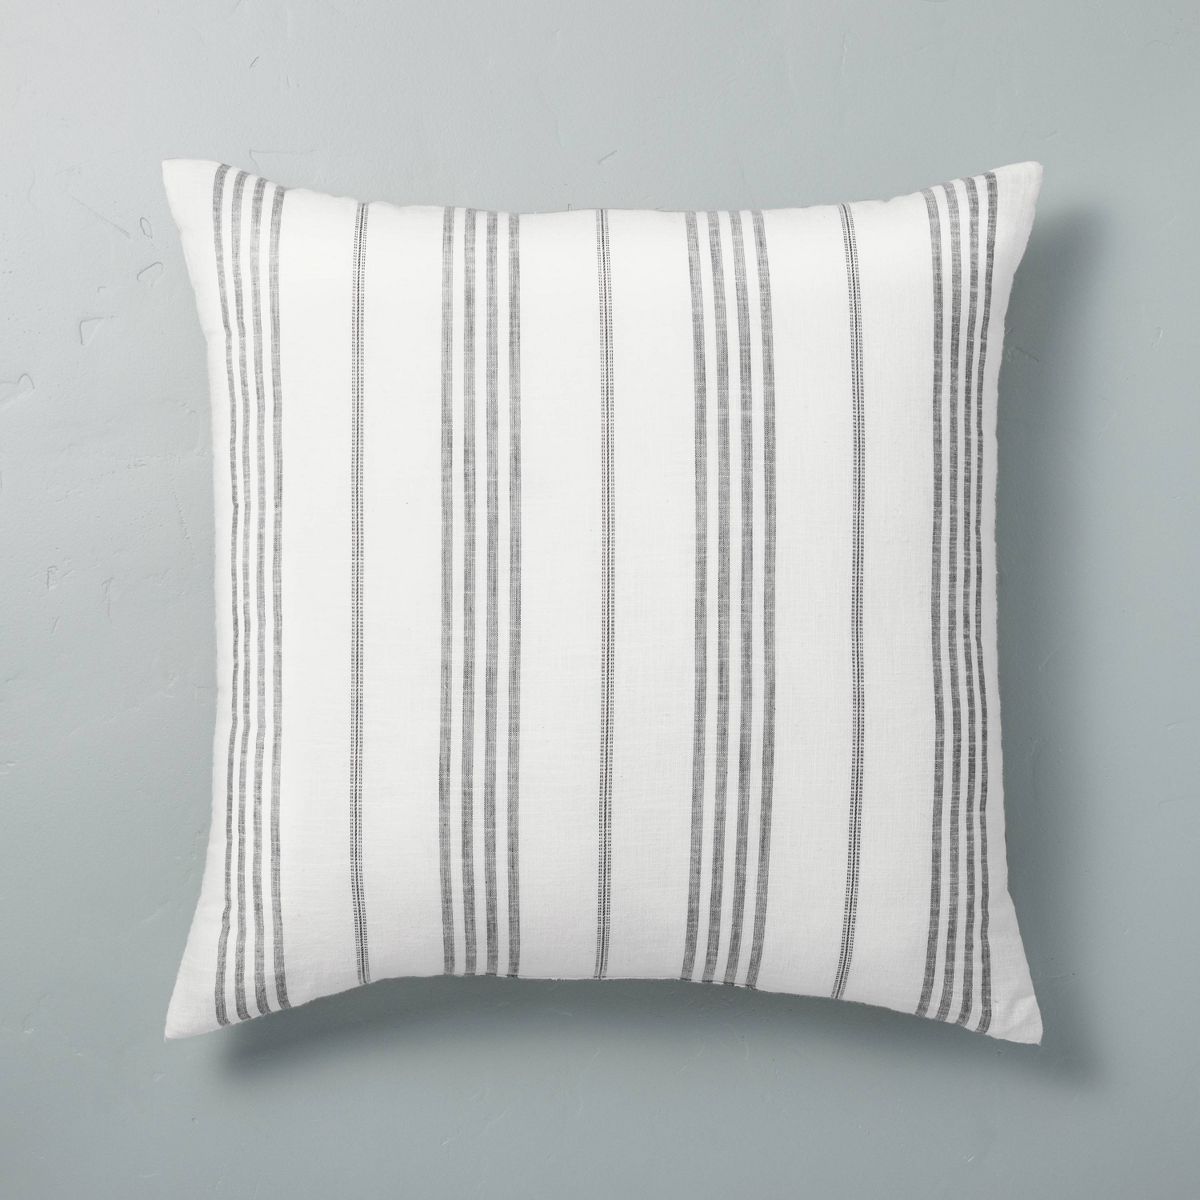 24"x24" Vertical Stripe Oversized Throw Pillow Sour Cream/Gray - Hearth & Hand™ with Magnolia | Target